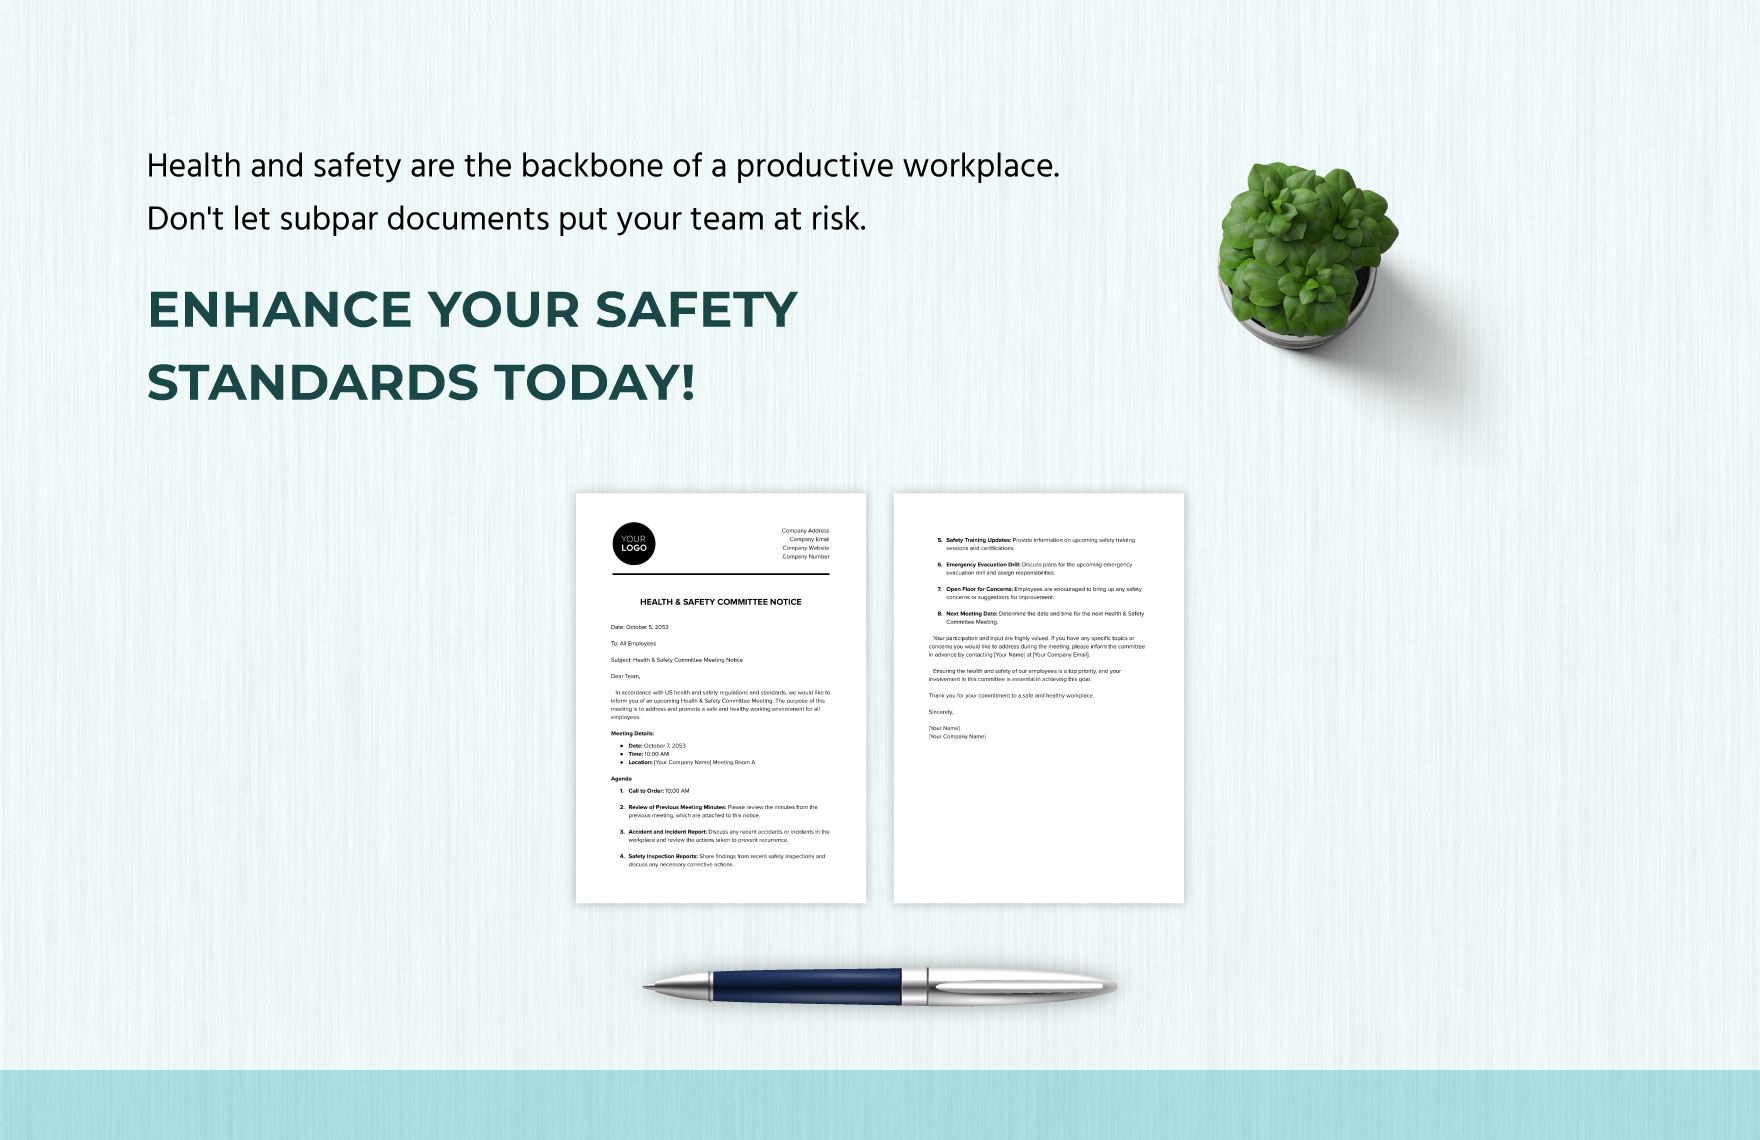 Health & Safety Committee Notice Template